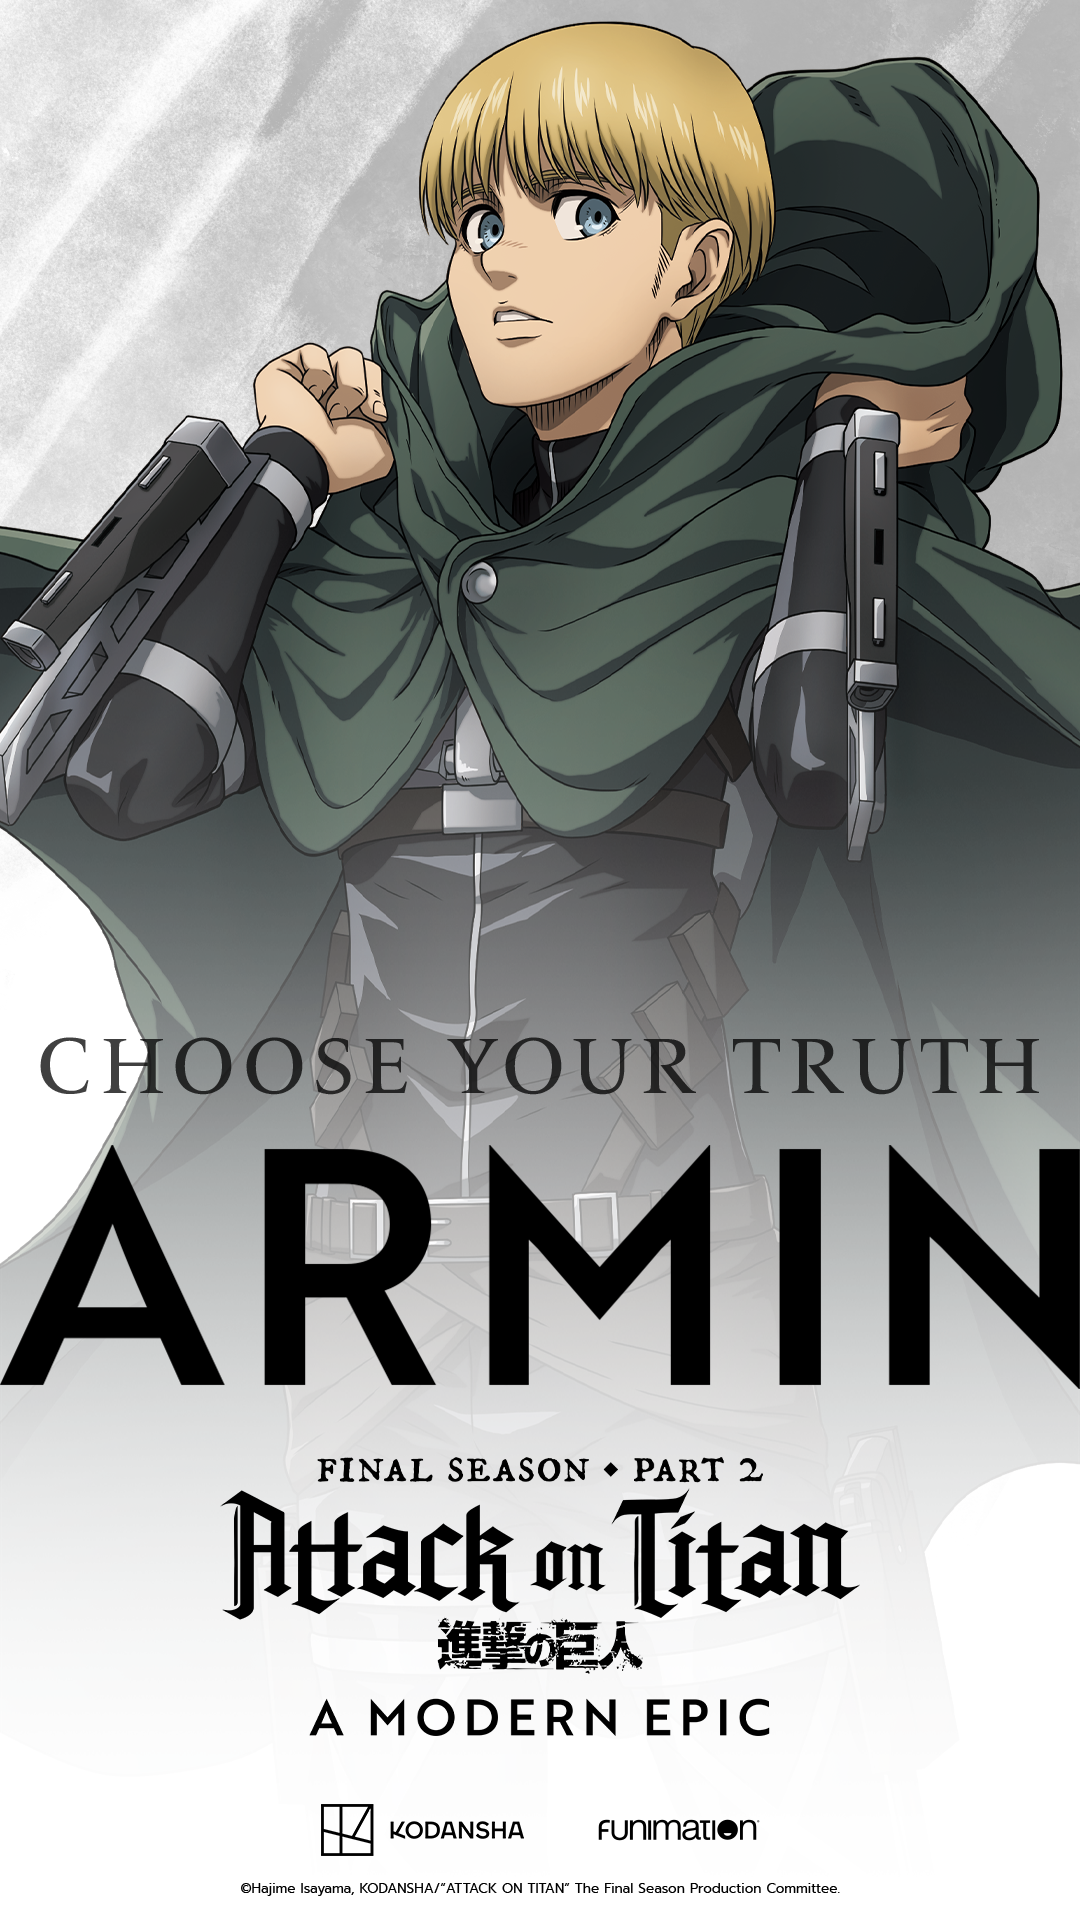 Support all TWELVE Attack on Titan Final Season Part 2 nominations at  @animeawards.official 2023! ⚔️ Vote using the link in our bio at…